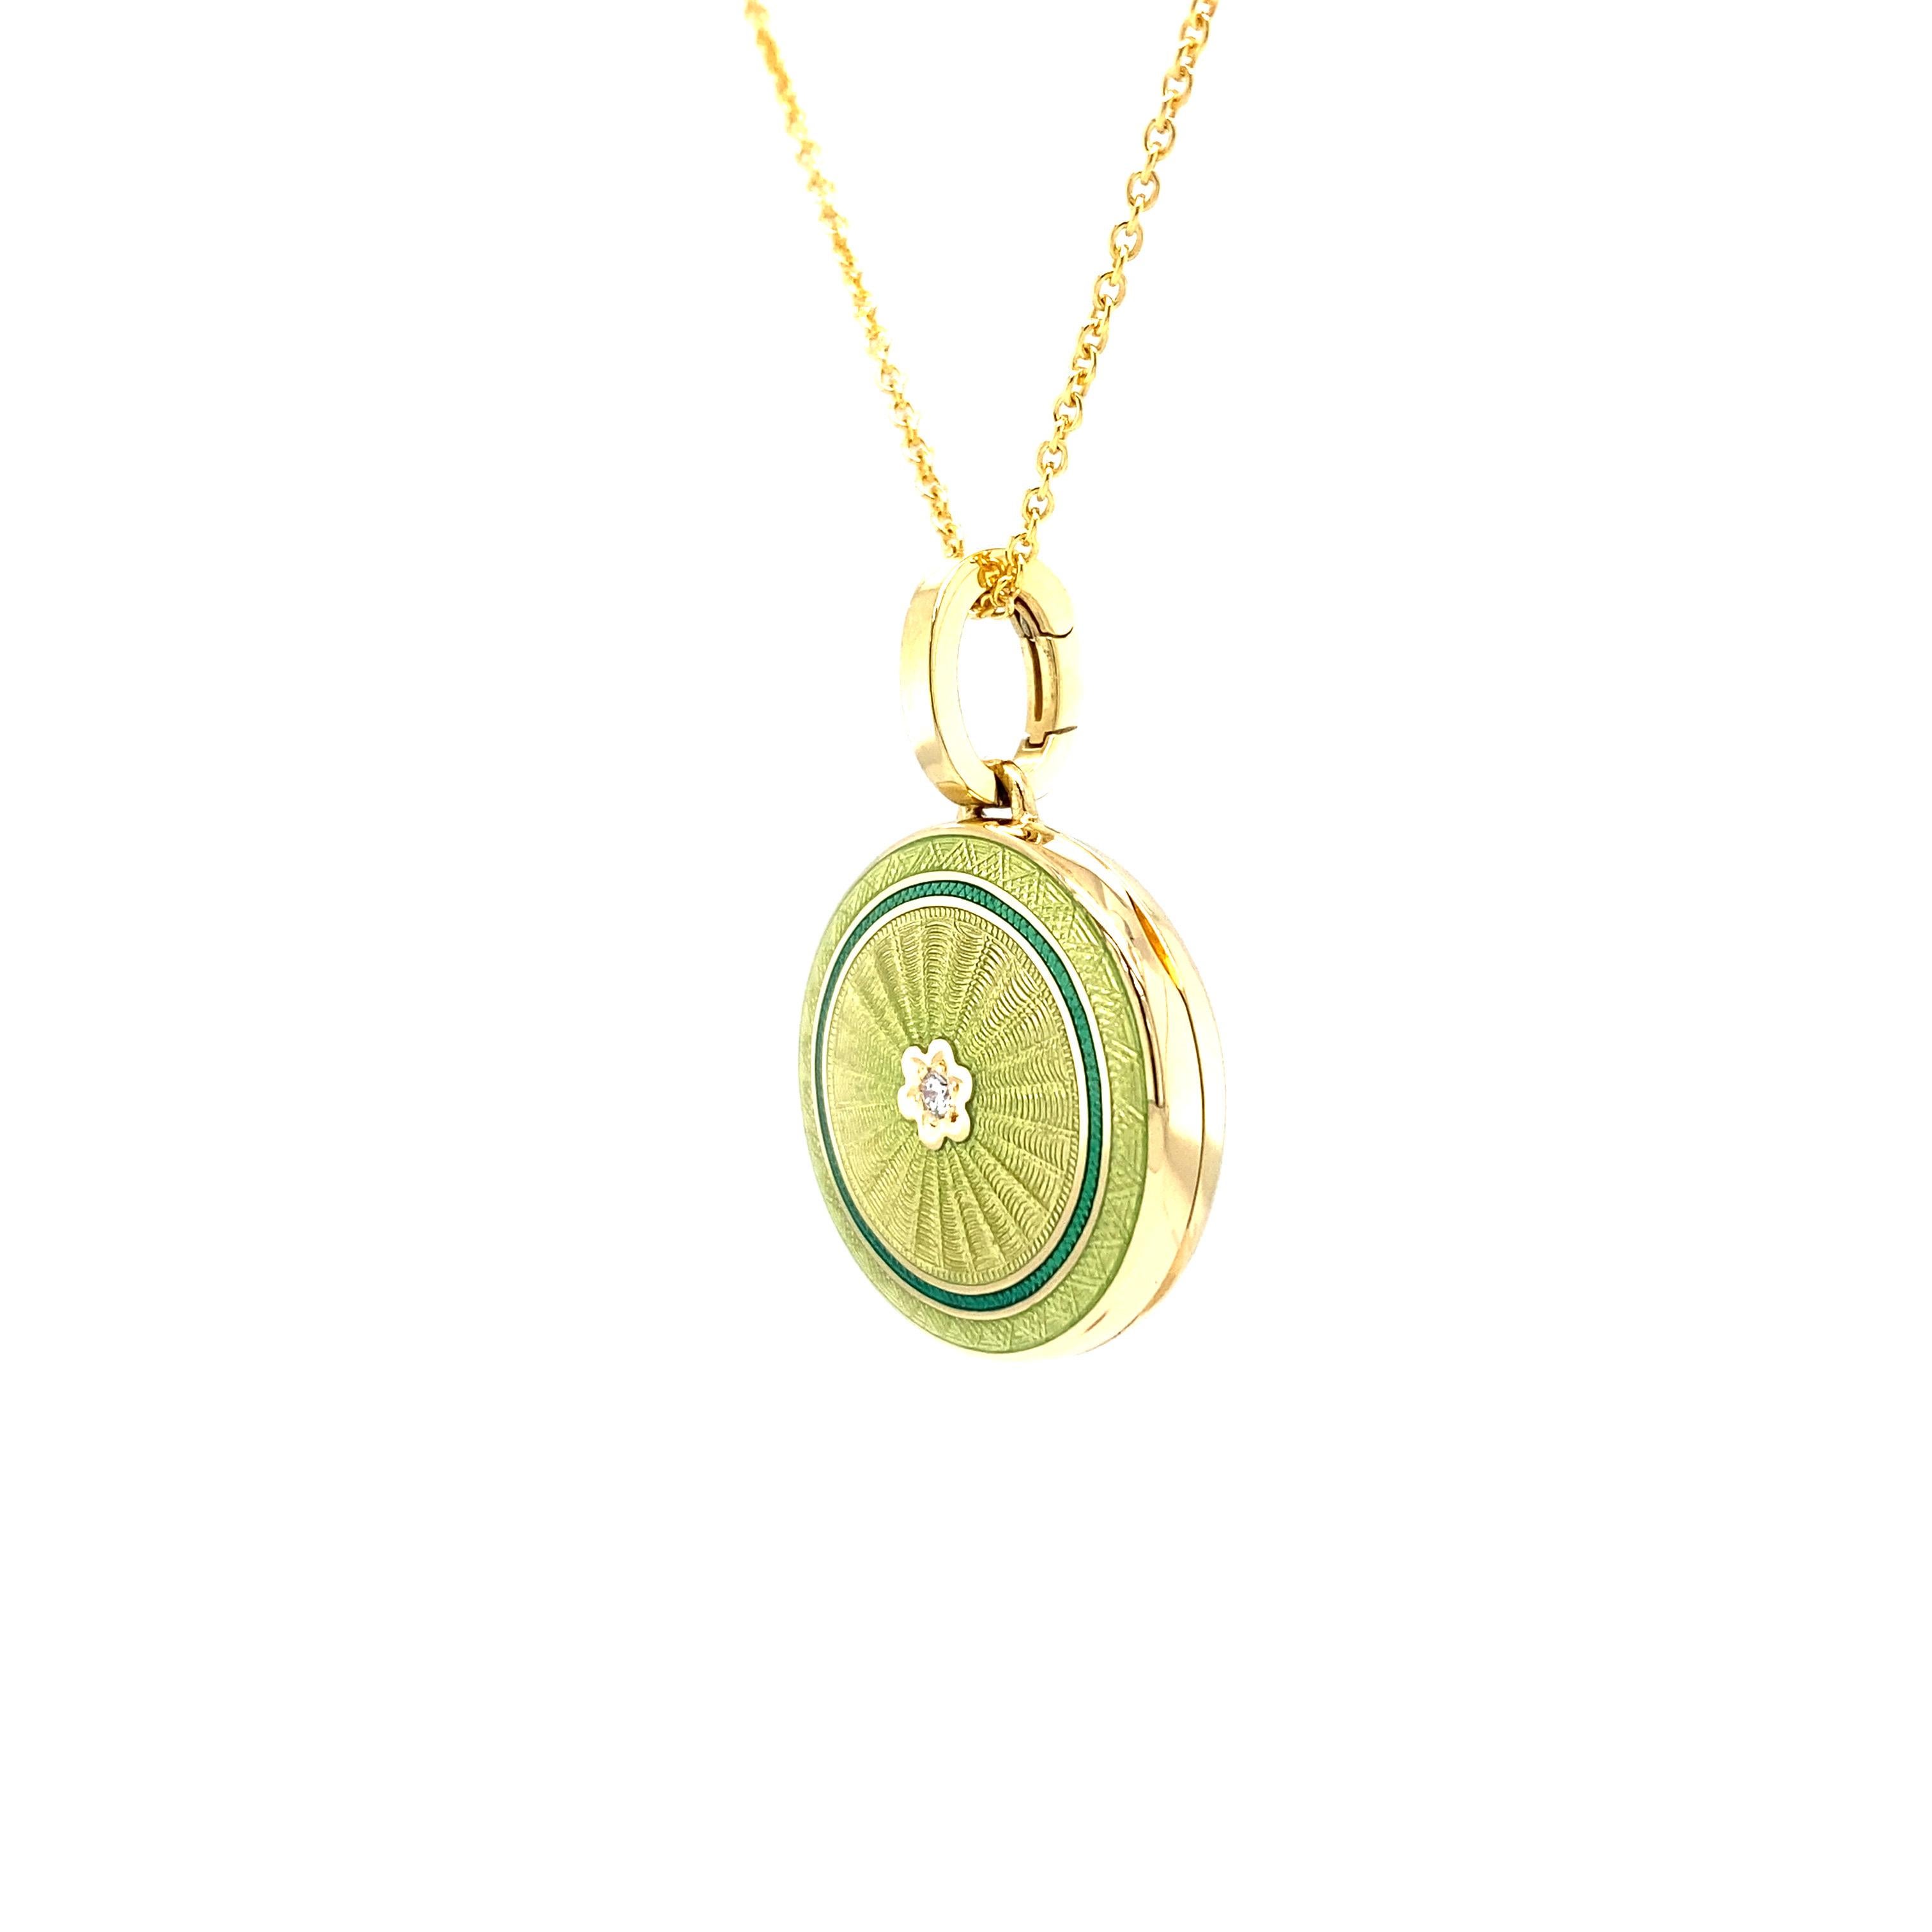 Victor Mayer round locket pendant with flower 18k yellow gold, Hallmark Collection, translucent light green and dark green vitreous enamel, 1 diamond, total 0.03 ct, H VS, diameter app. 21.0 mm

About the creator Victor Mayer
Victor Mayer is